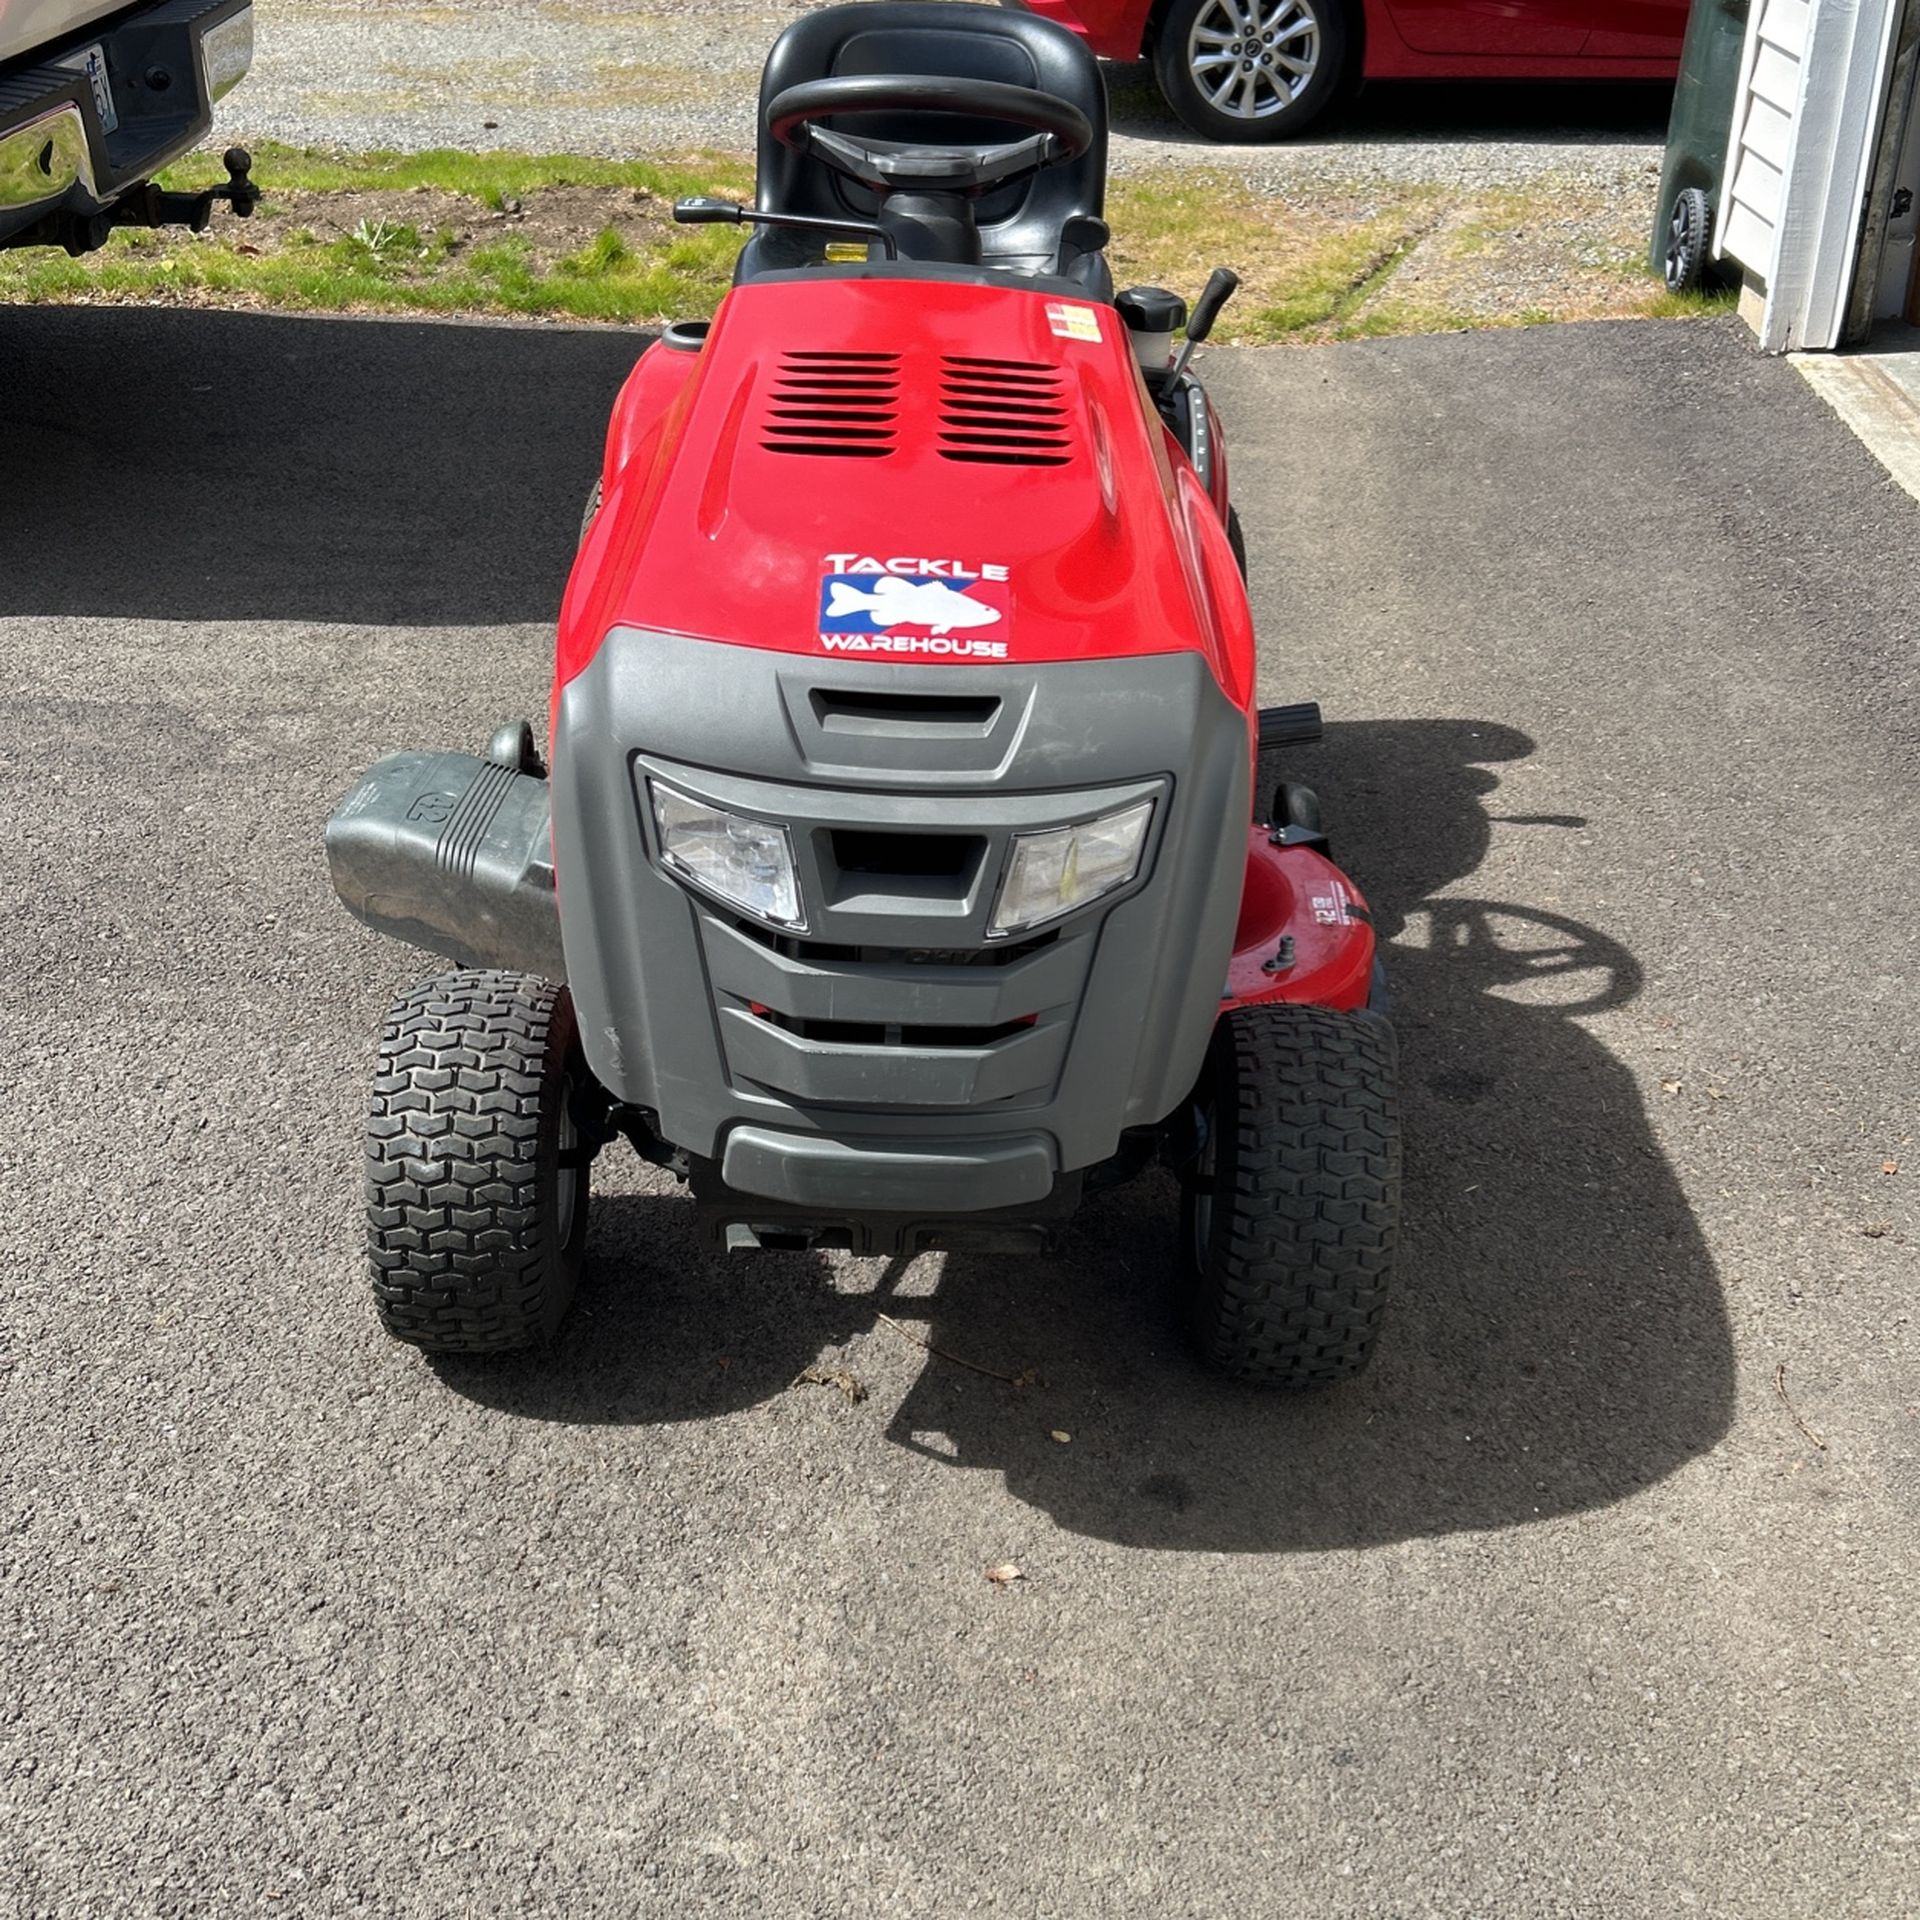 Snapper Riding Lawn Mower